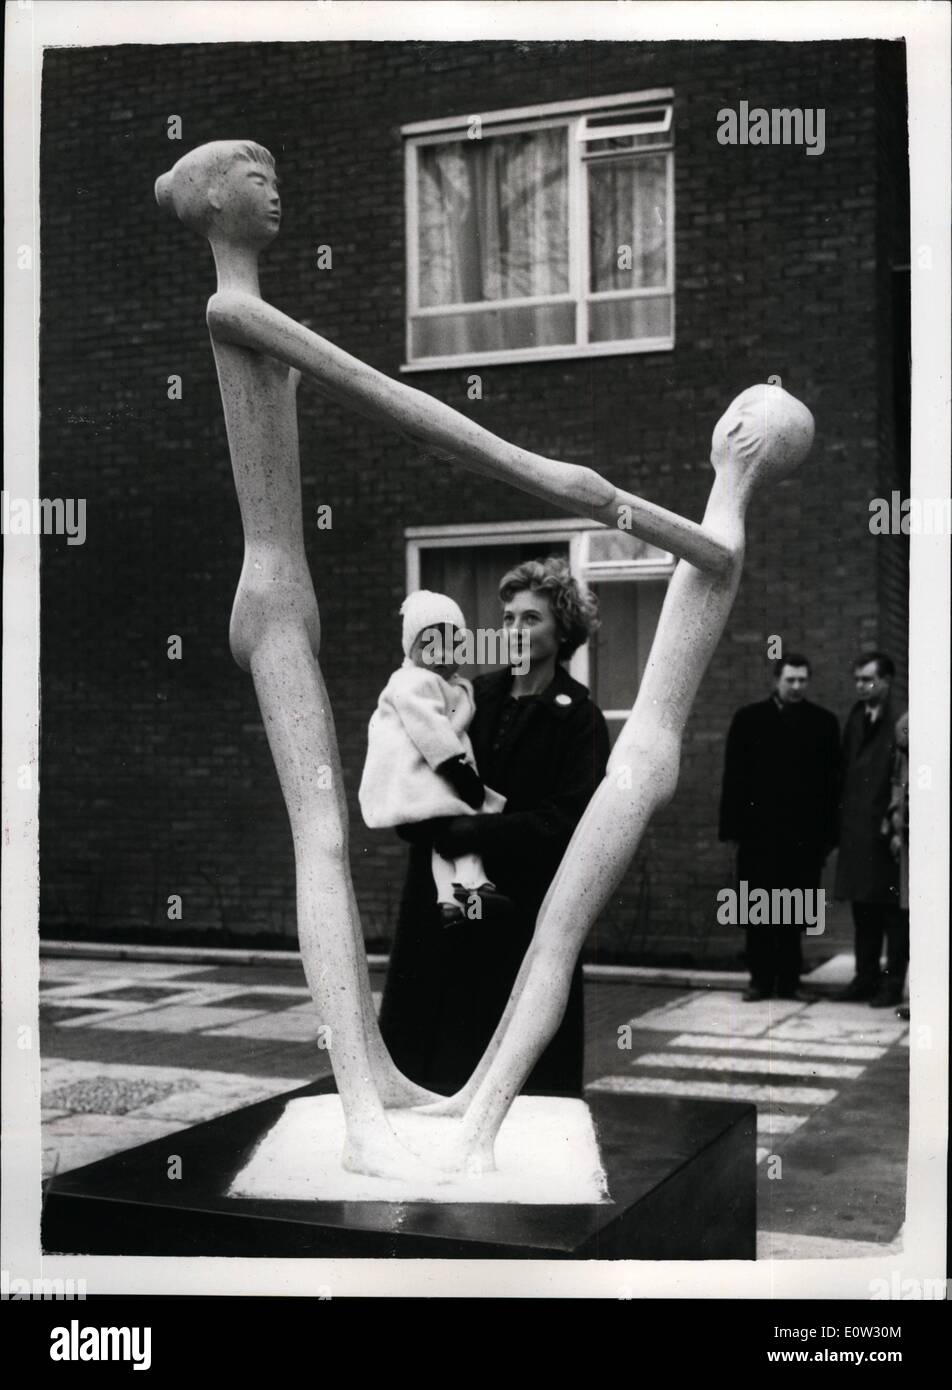 Jan. 01, 1961 - UNVEILING OF ''MOTHER & CHILD'' STATUE AT DULWICH. ''Mother & Child'', by Patricia Rowland, A.R.C.A., a free-standing sculpture positioned outside Lowood Court, an eight-storey block of flats built by Wates Built Homes Ltd. at Farquhar Road, Dulwich Wood Park, S.E. 19, was unveiled today by Charles Pearce, O.B.E., J.P., F.E.I.S., Chairman of the Estate Governors of Alleyns College of God's Gift, generally known as the Dulwich College Estate. Keystone Photo Shows:- Mrs Stock Photo